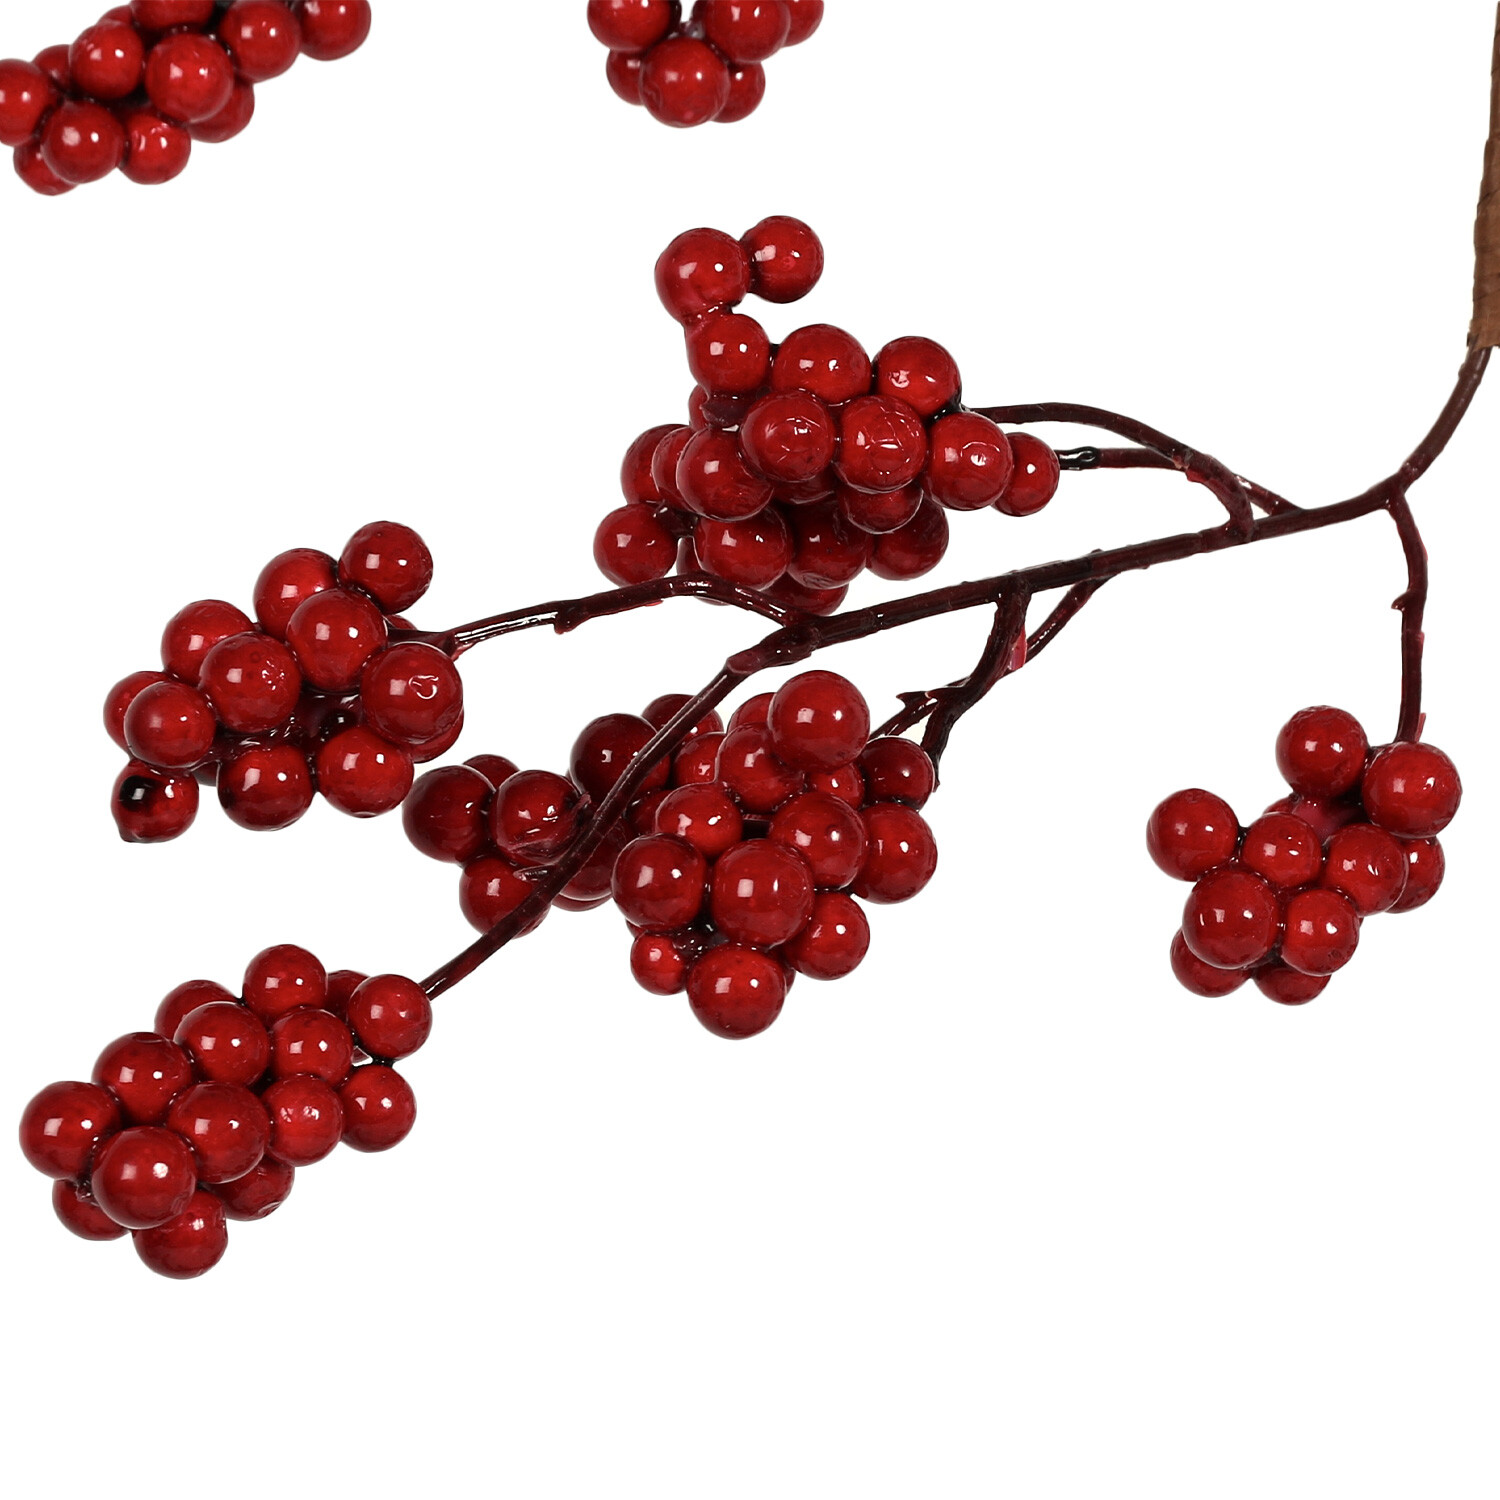 Festive Red Berry Garland - Red Image 3